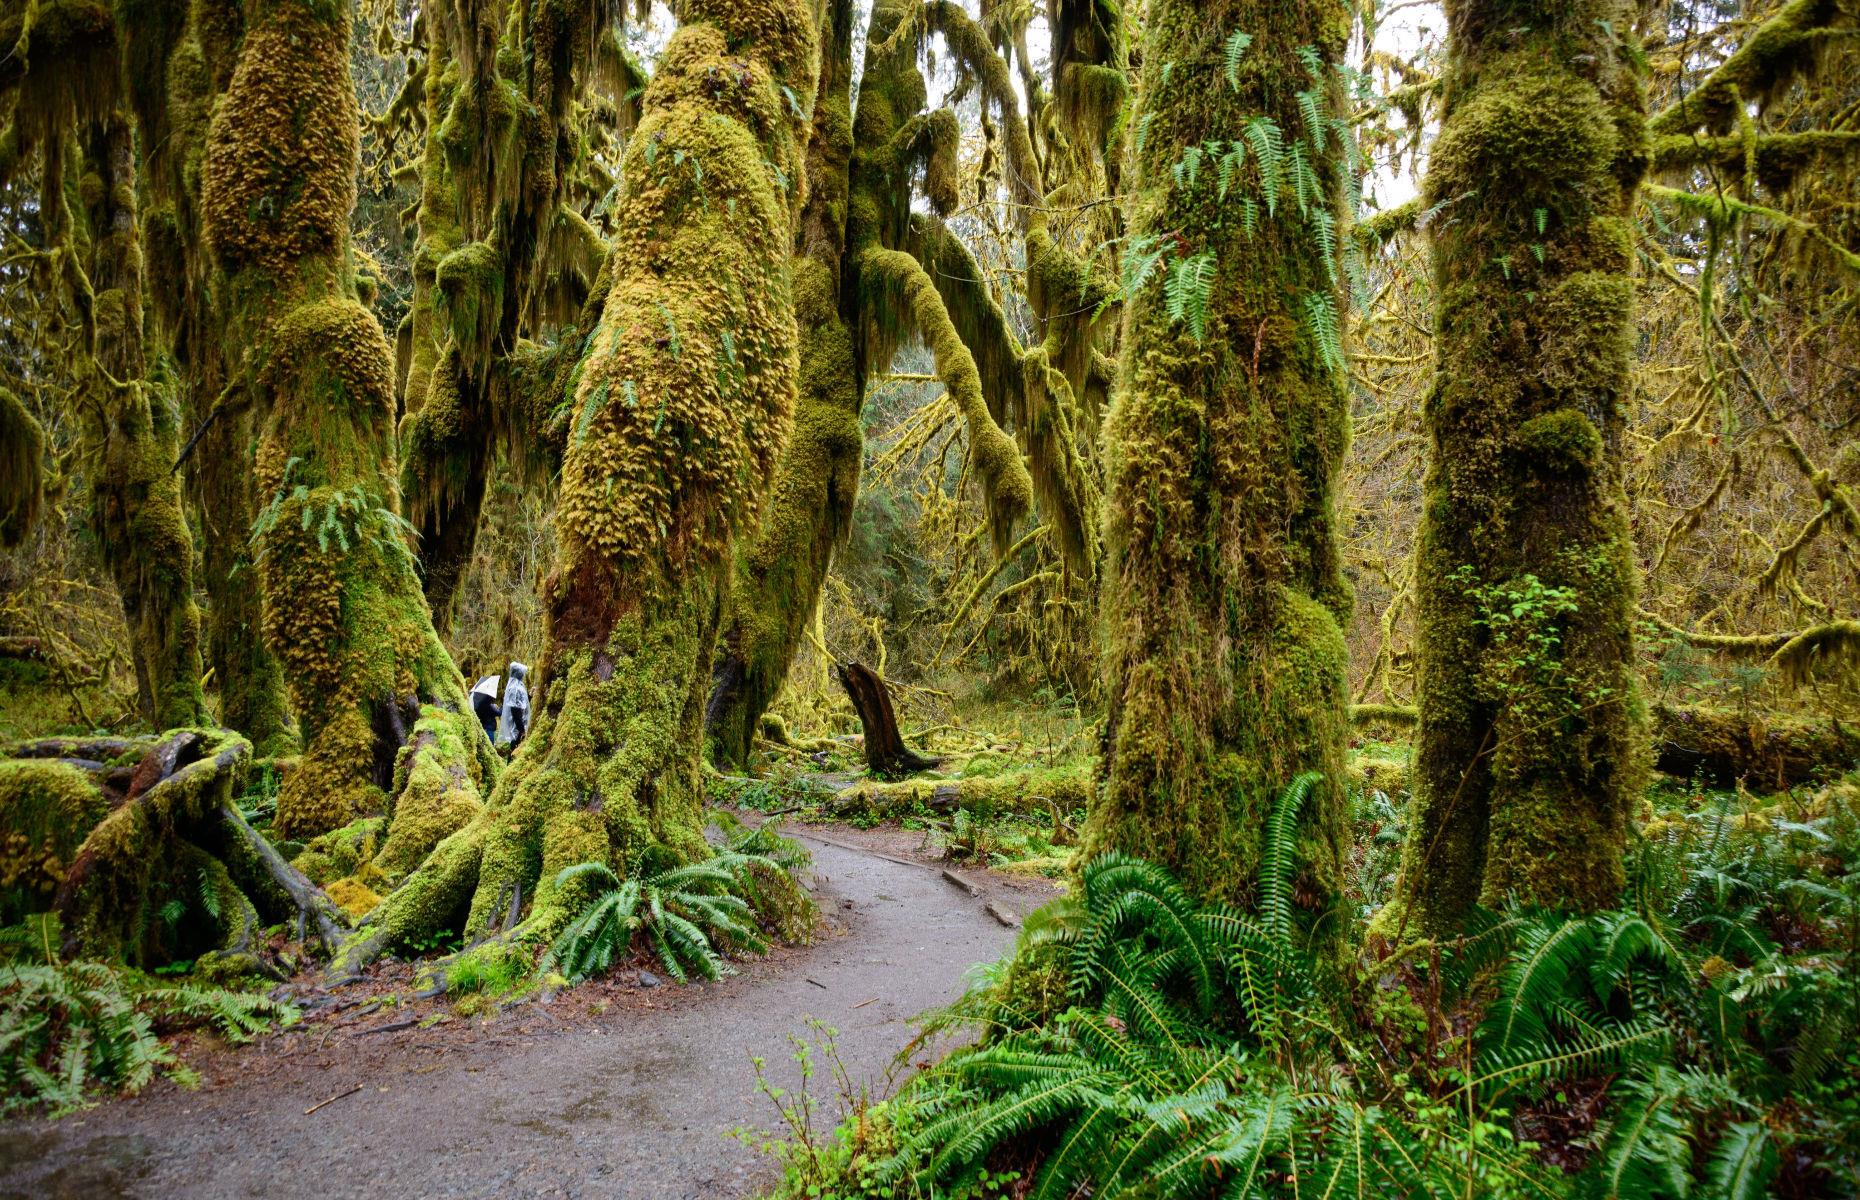 <p><a href="https://www.nps.gov/olym/index.htm">Olympic National Park</a> is a dream destination for nature-loving families and the only thing better than visiting the wilderness is a road trip exploring its diverse landscapes. The Peninsula Loop edges the park for around 300 miles (483km), and you’ll want plenty of time to hike, camp or just gawp at the scenery, from glacier-capped mountains to sandy, often secluded coves.</p>  <p><a href="https://www.loveexploring.com/galleries/84609/stunning-us-spots-to-relax-in-your-rv-autumn-fall-2020?page=1"><strong>Discover the most stunning spots to relax in your RV</strong></a></p>